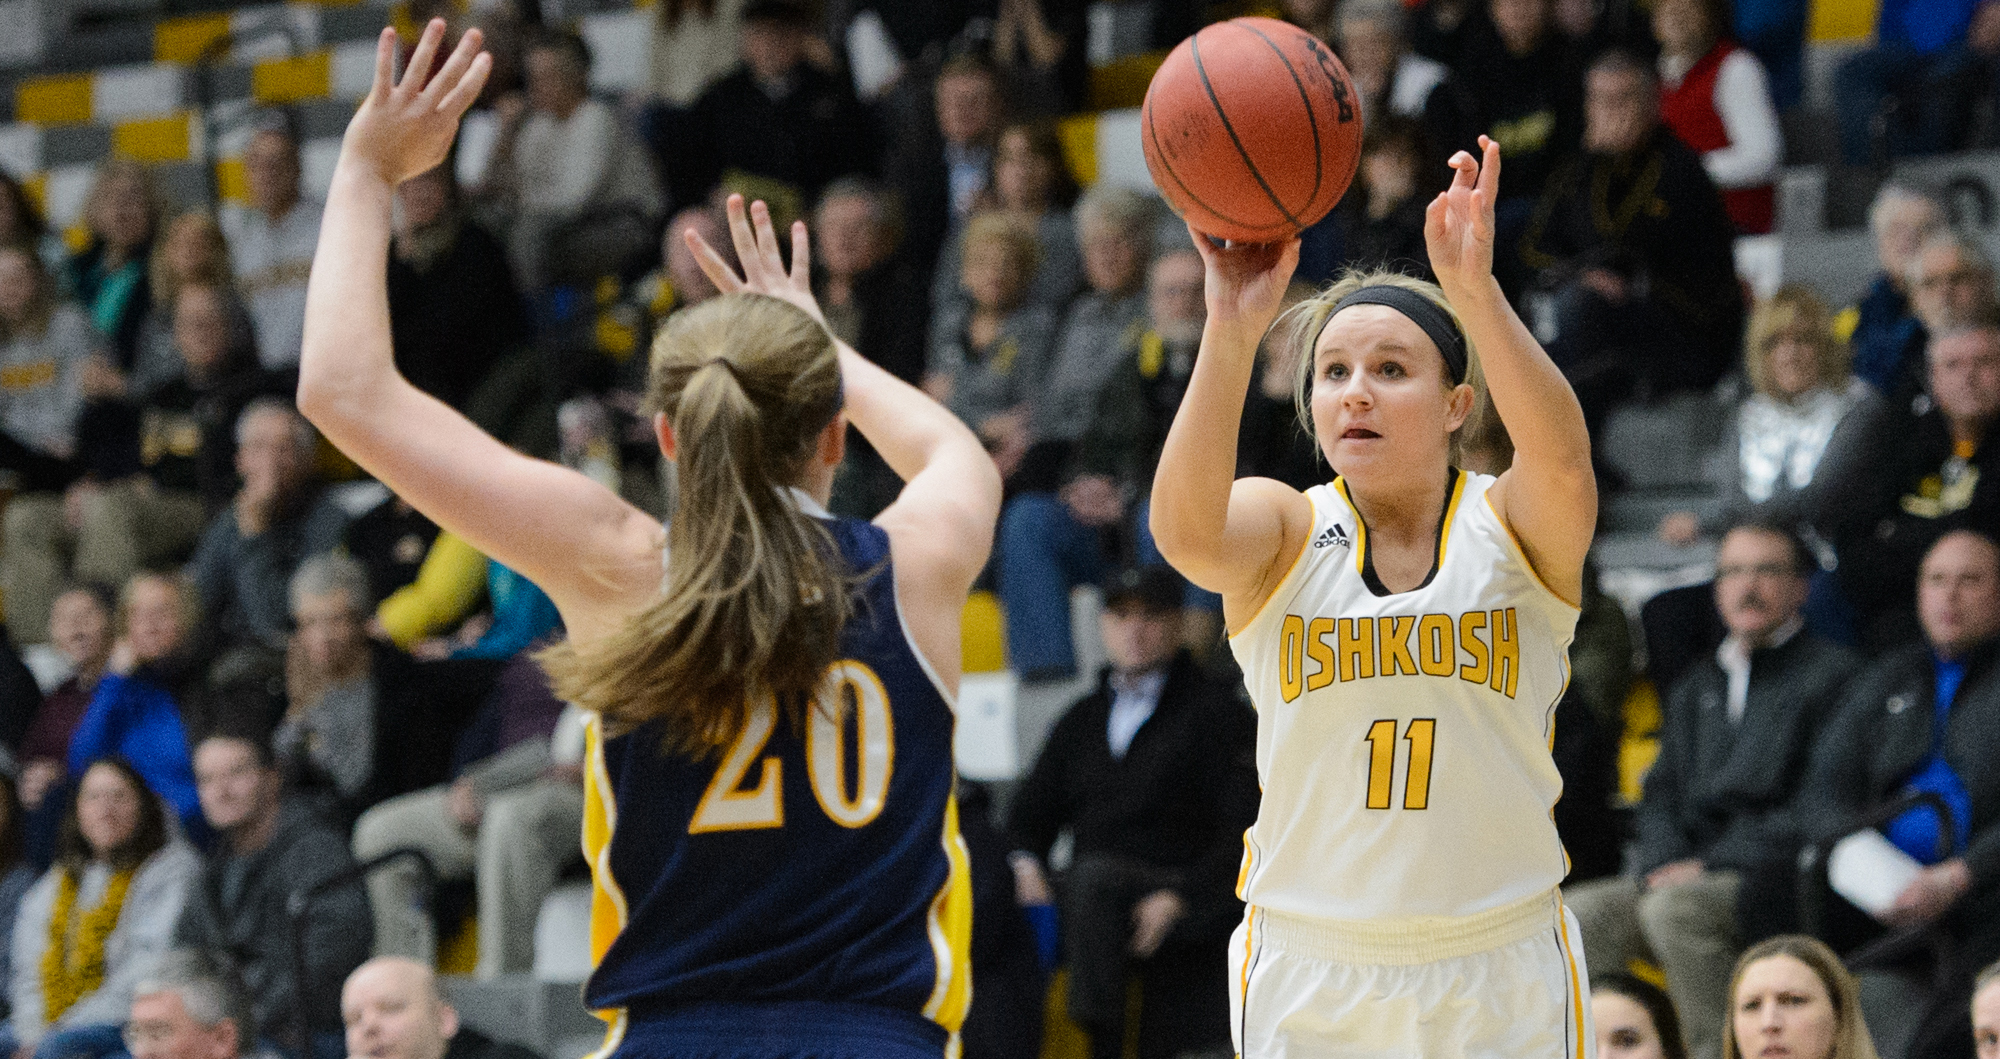 Emma Melotik gave UW-Oshkosh a 43-33 lead with her 3-point basket at the end of the third quarter.